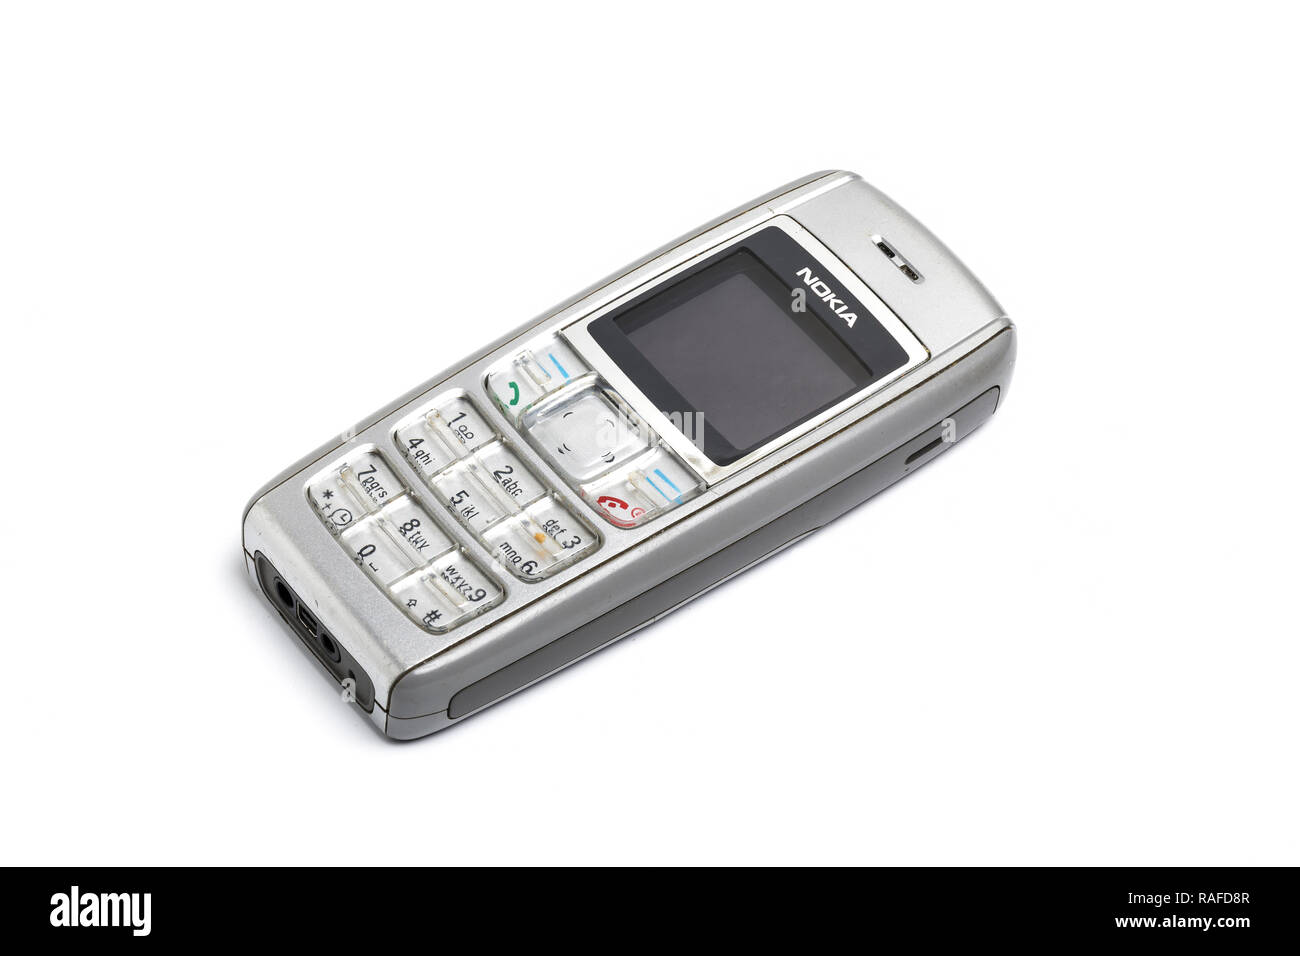 Nokia 1600 mobile phone or cell phone, from 2006. Well used. Stock Photo